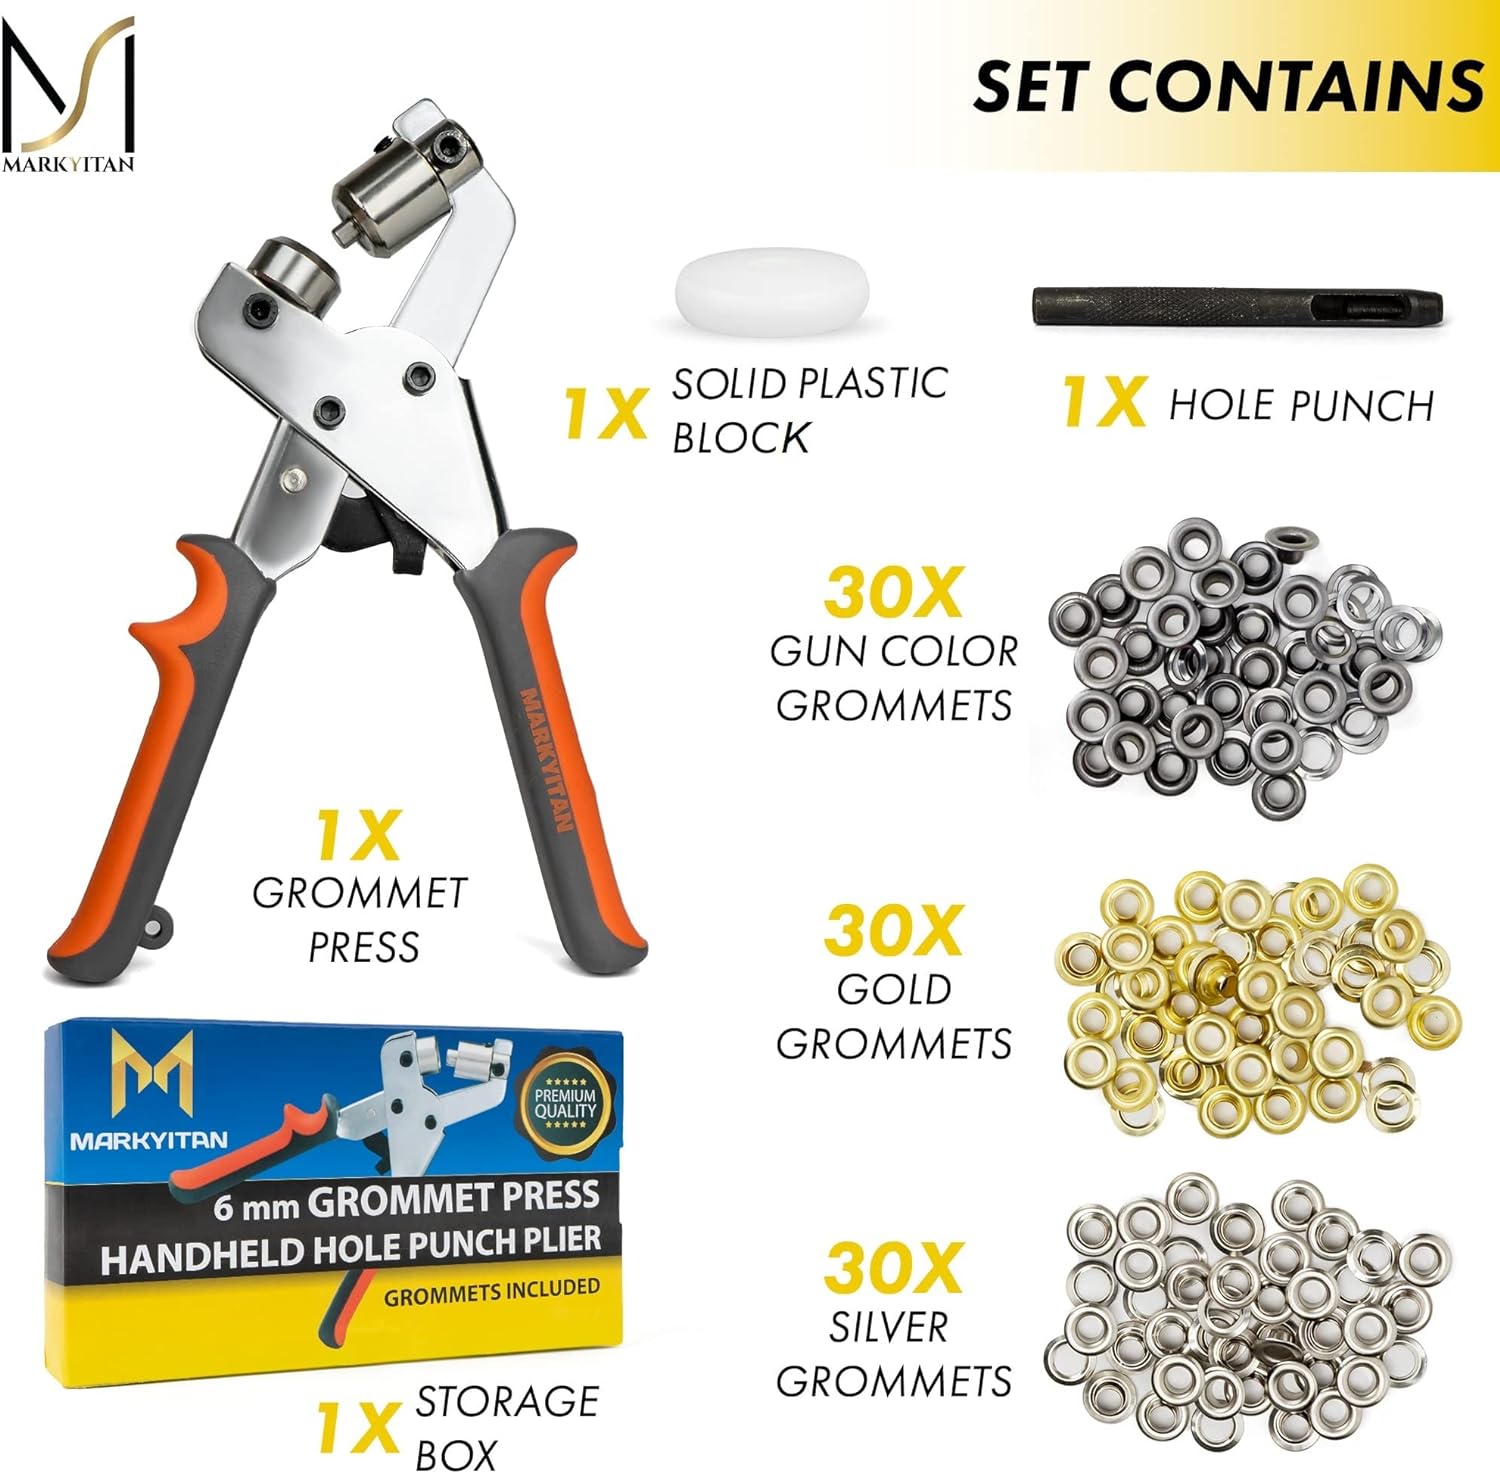 MARKYITAN 1/4 Inch (6mm) Grommet Tool Kit - Including 1 x Grommet Press Plier, 90 x Metal Grommets (Silver, Golg, and Chrome), 1 x Leathe